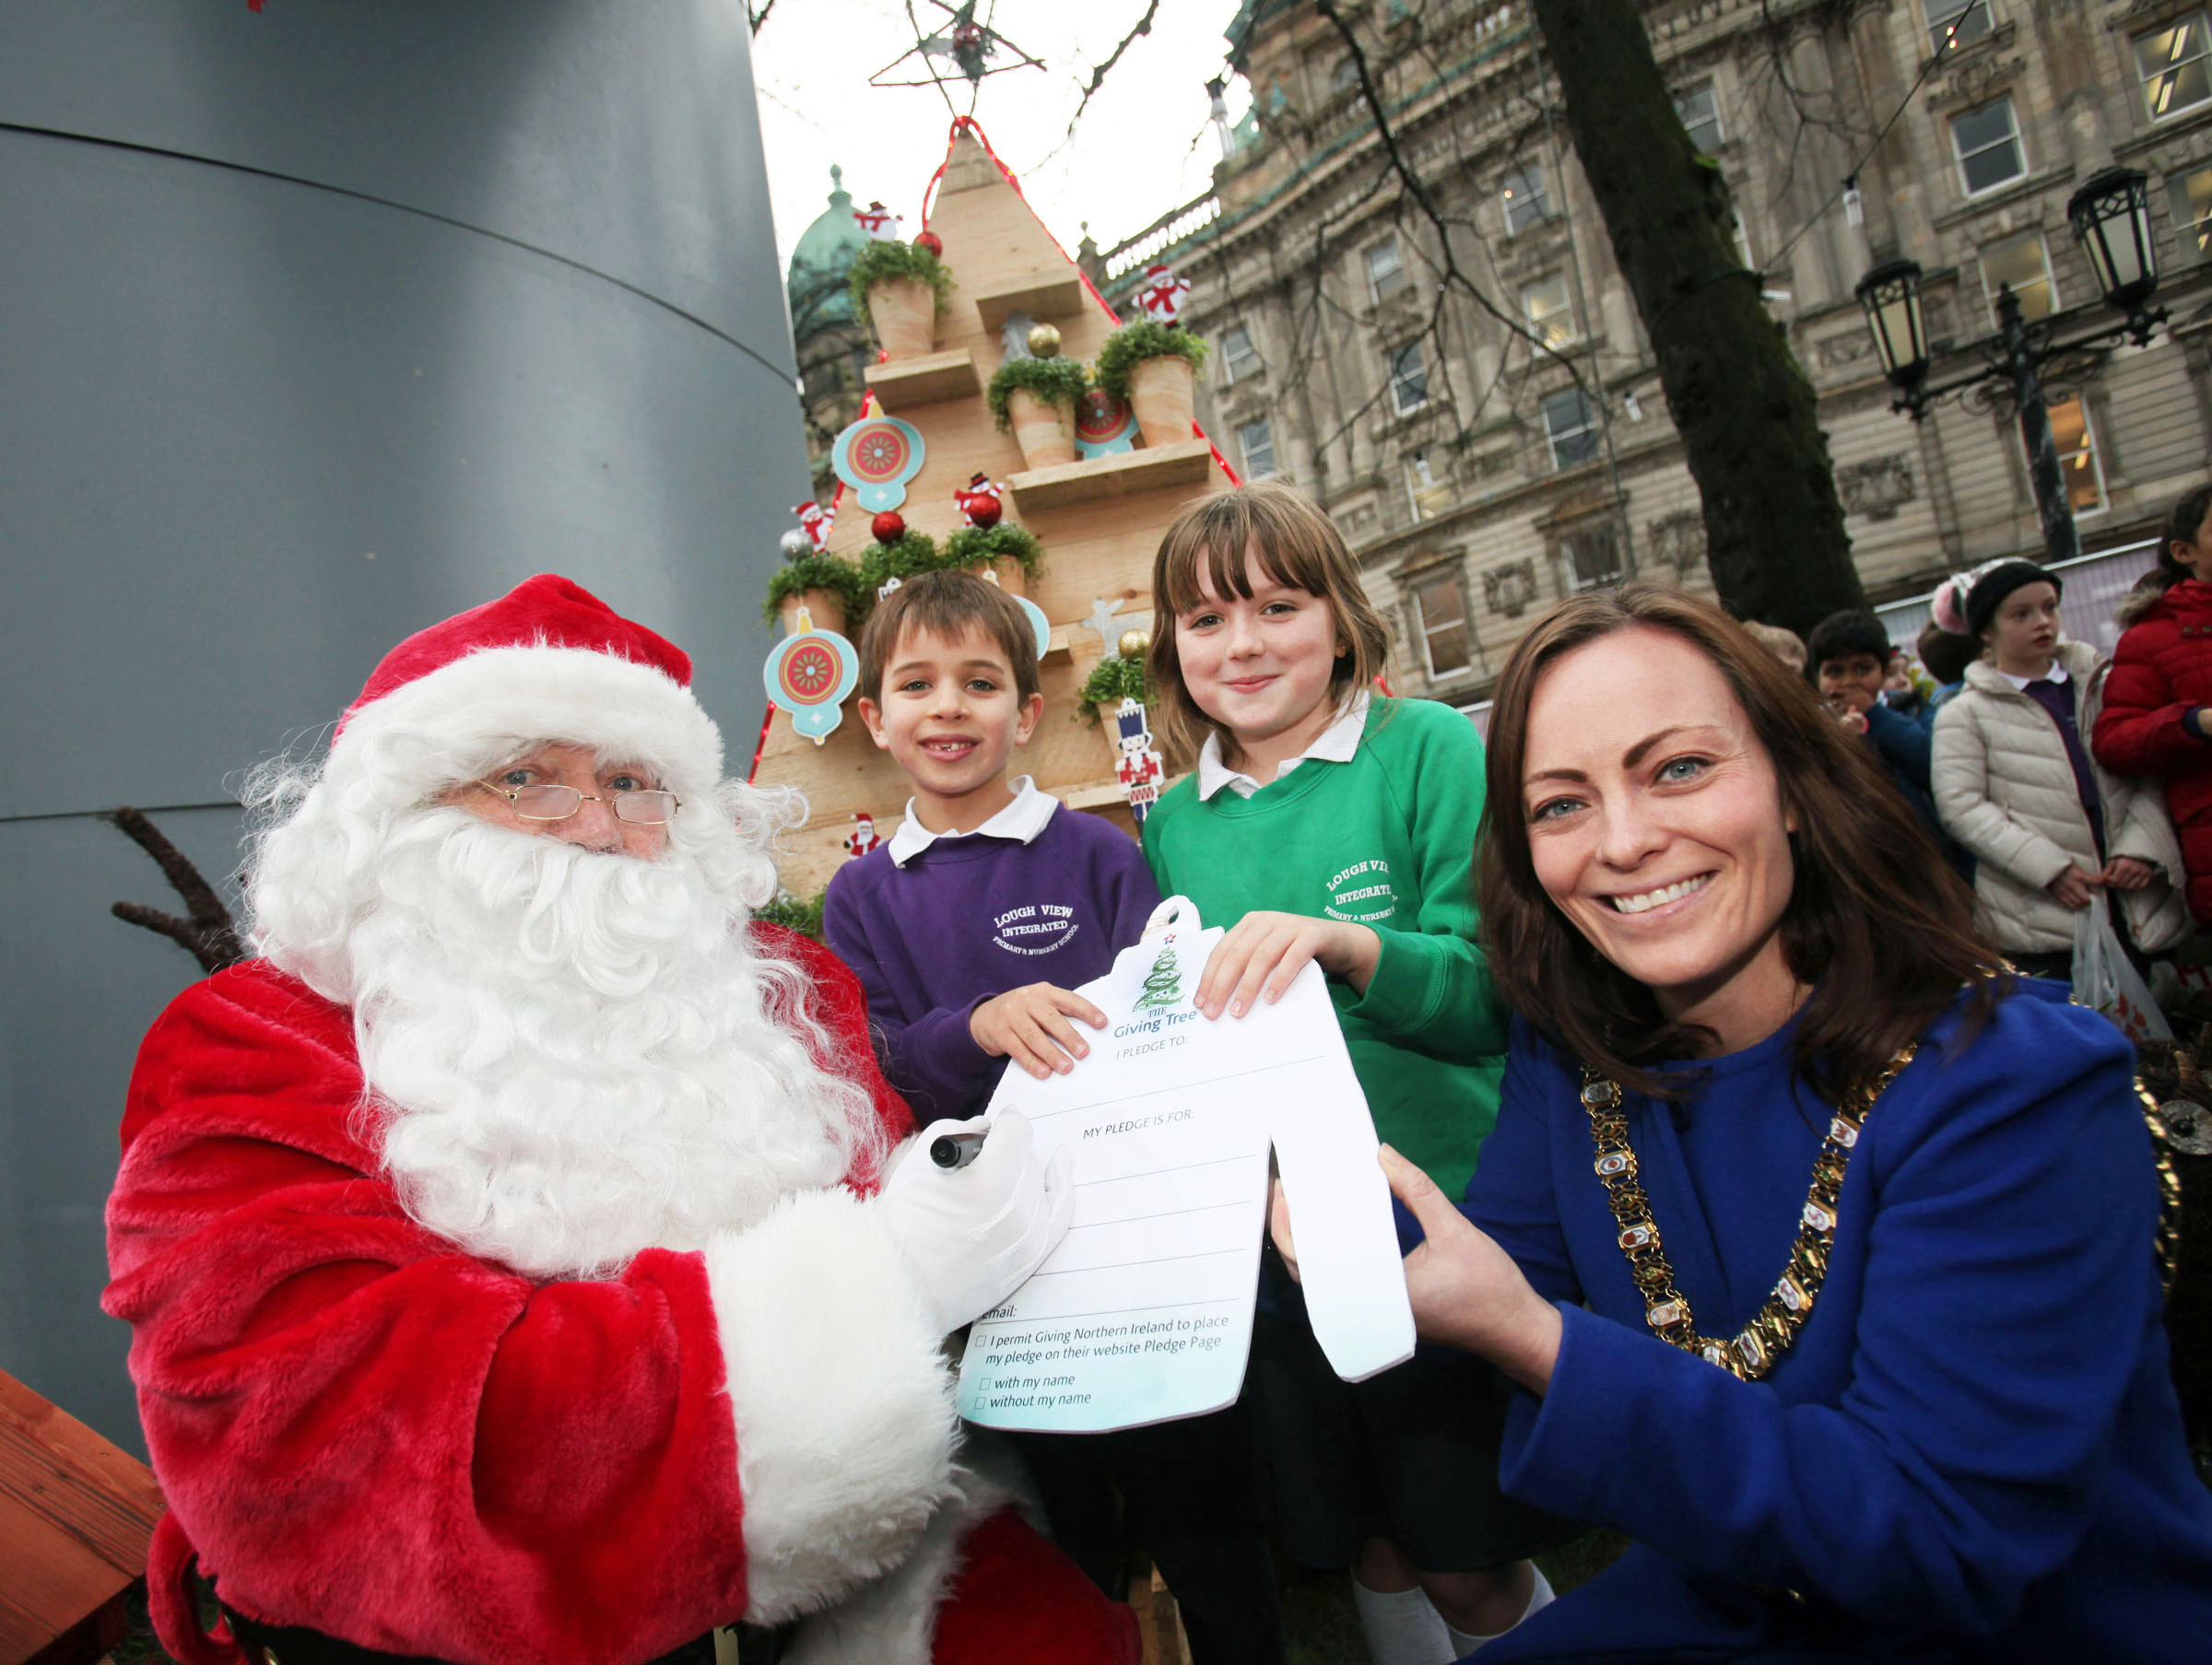 Belfast Christmas Market branches out by hosting charity Giving Tree